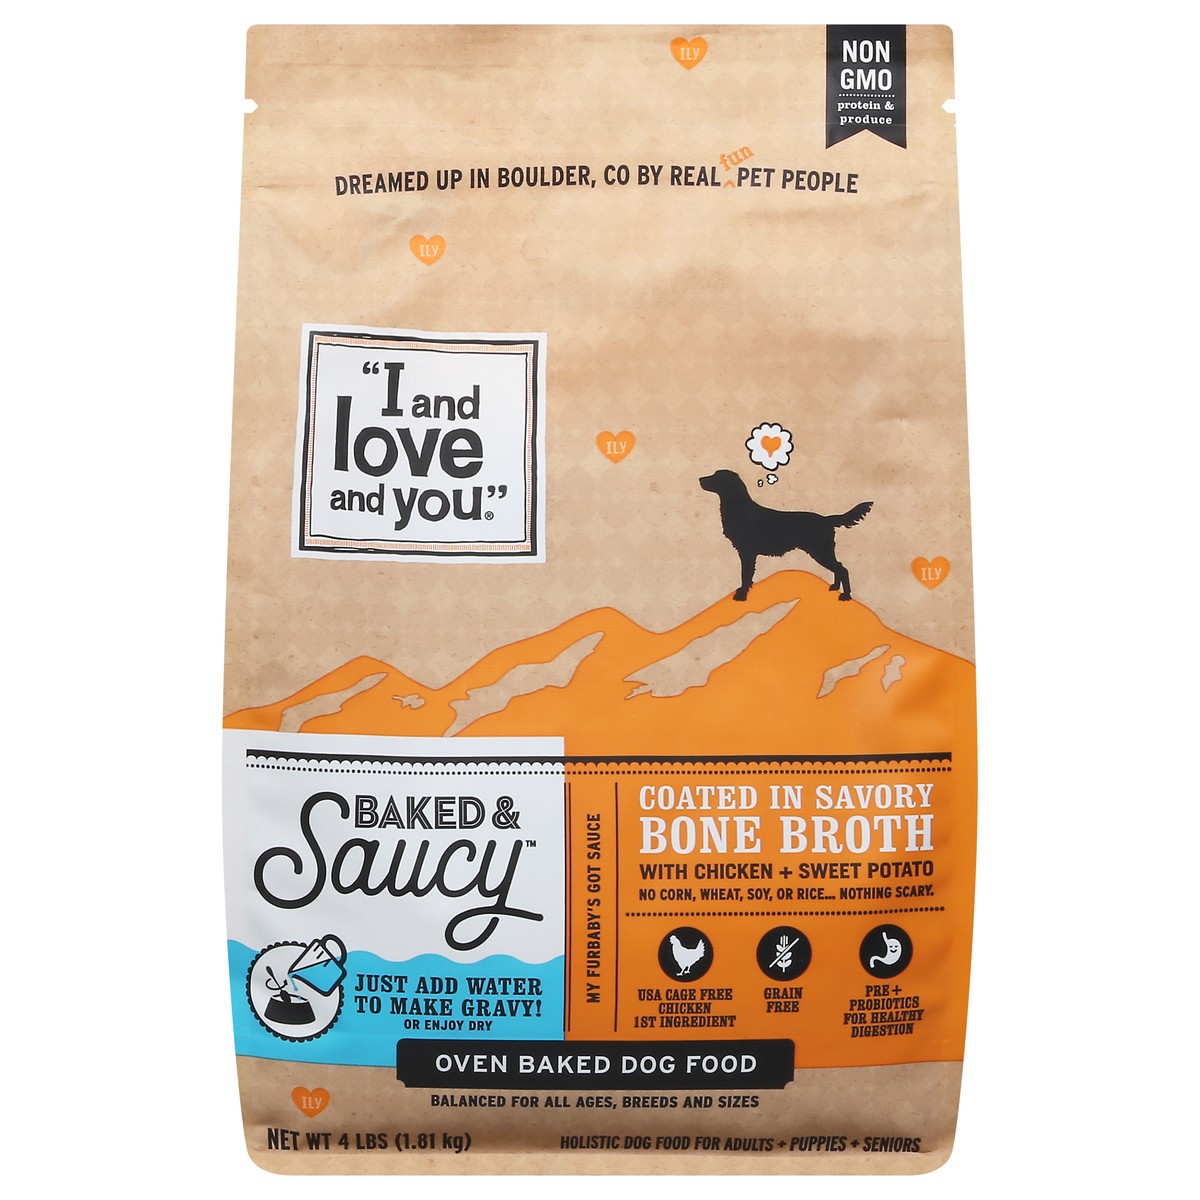 slide 5 of 15, I and Love and You Baked & Saucy Coated in Savory Bone Broth Oven Baked Dog Food 4 lb, 4 lb